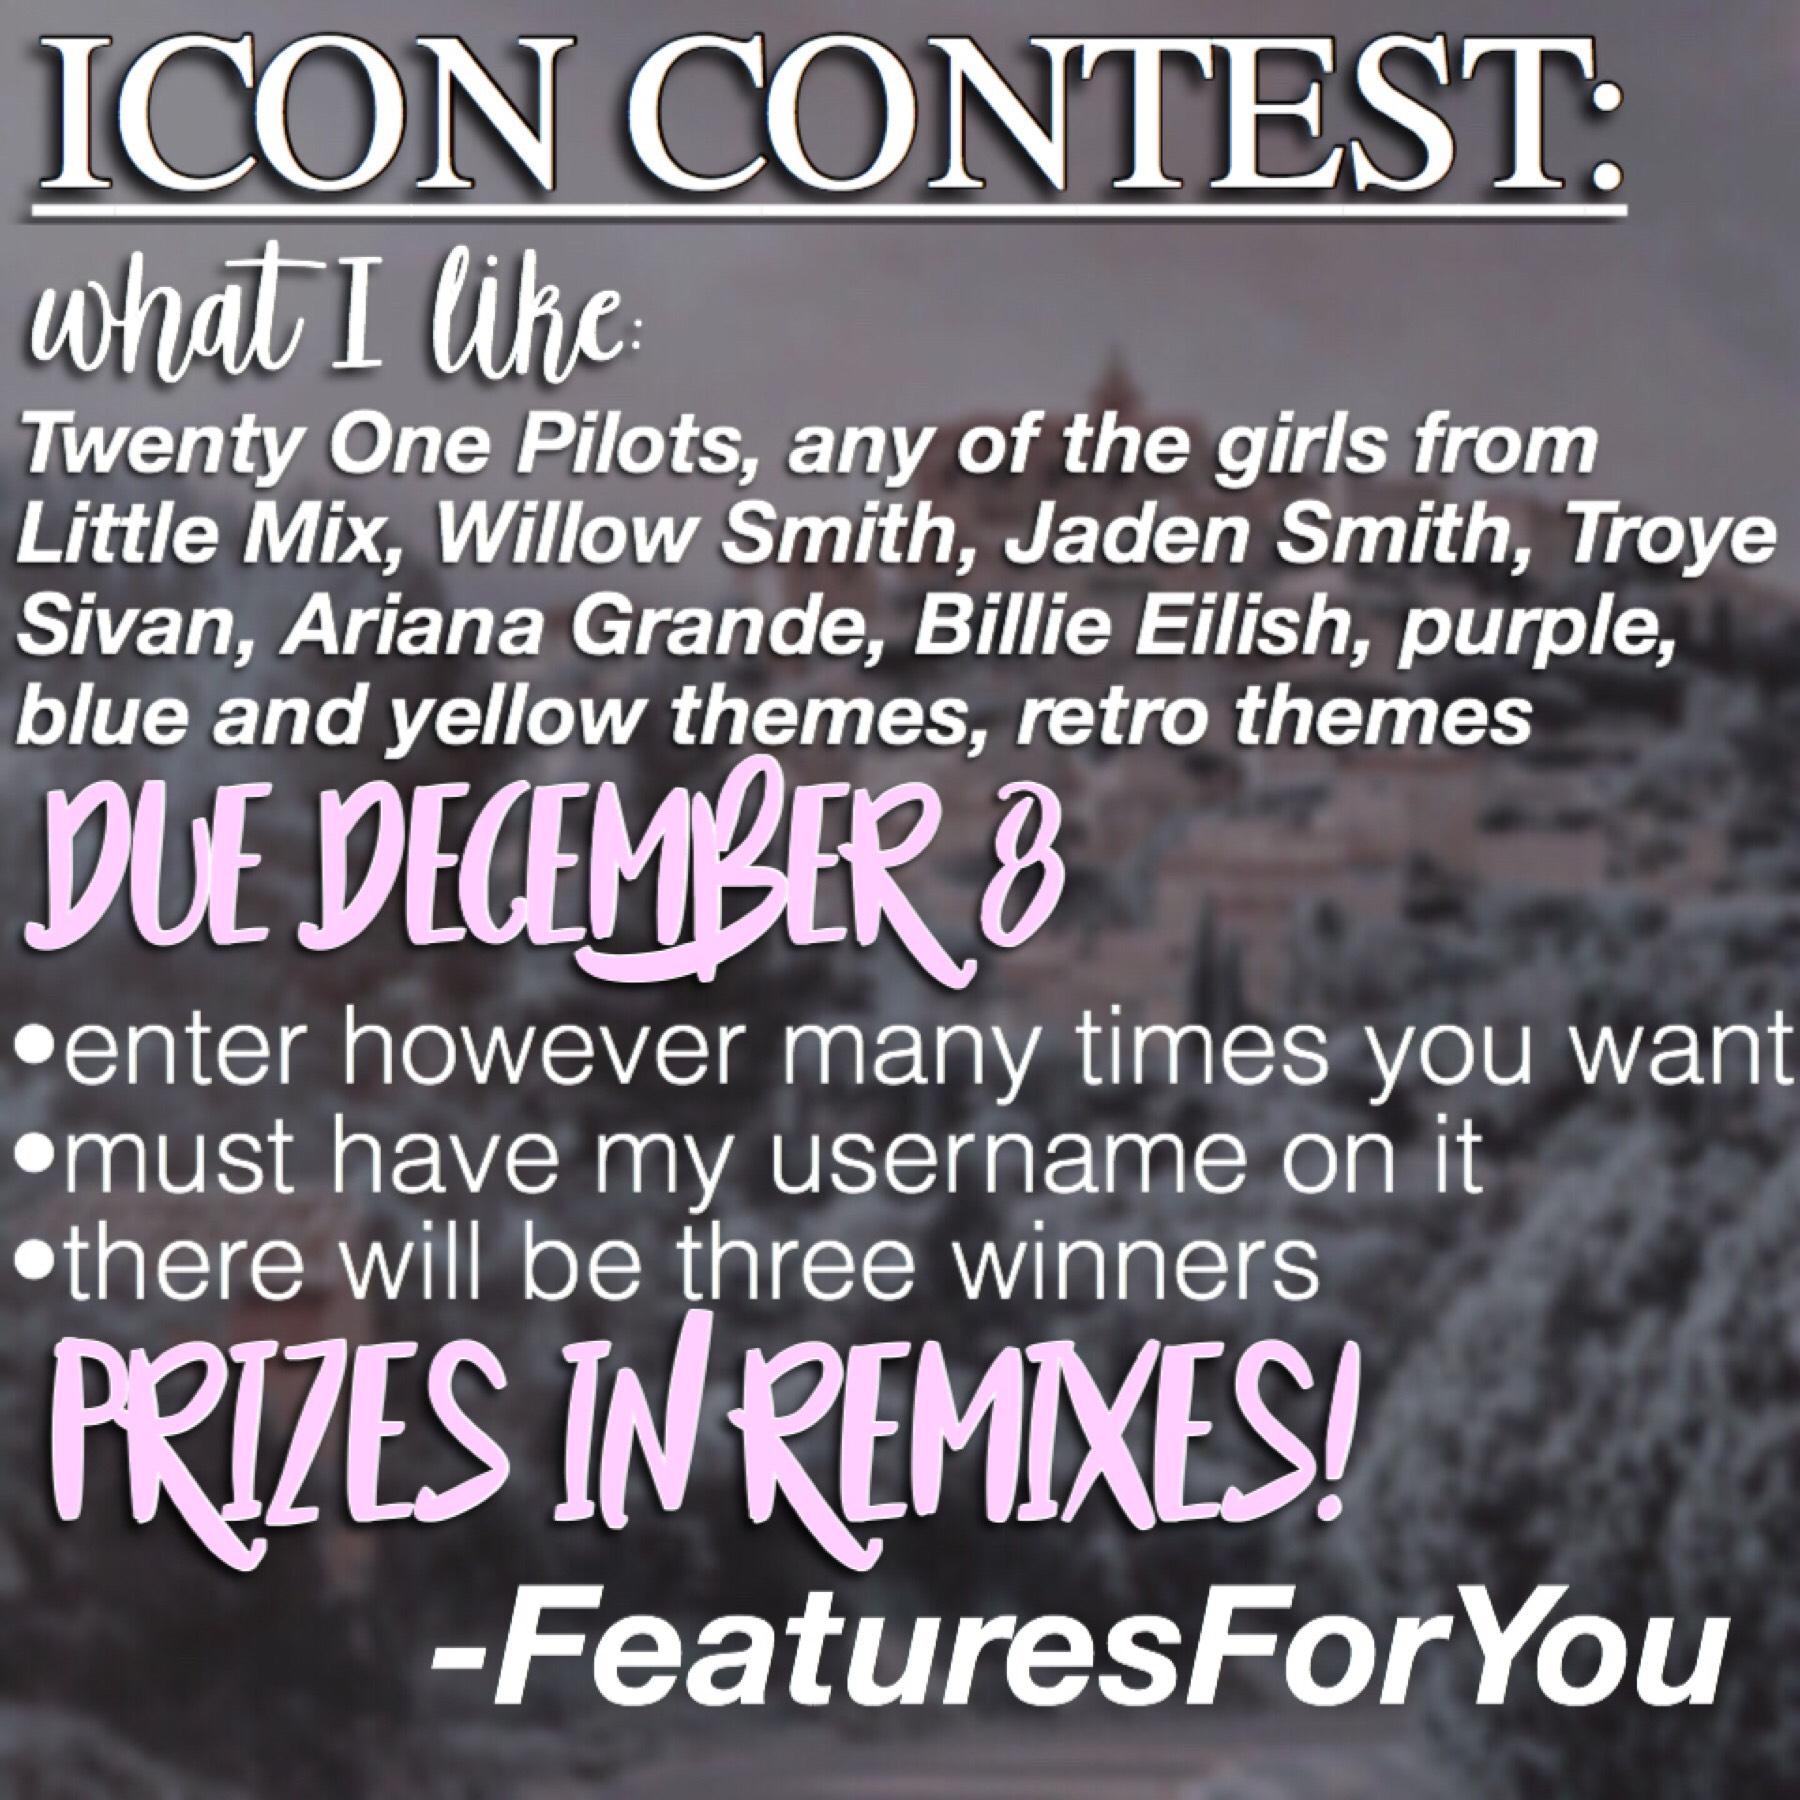 Check the remixes for the prizes as well as an important notice regarding a giveaway on my main! Please join! Also, stay tuned for a giveaway on this page! 